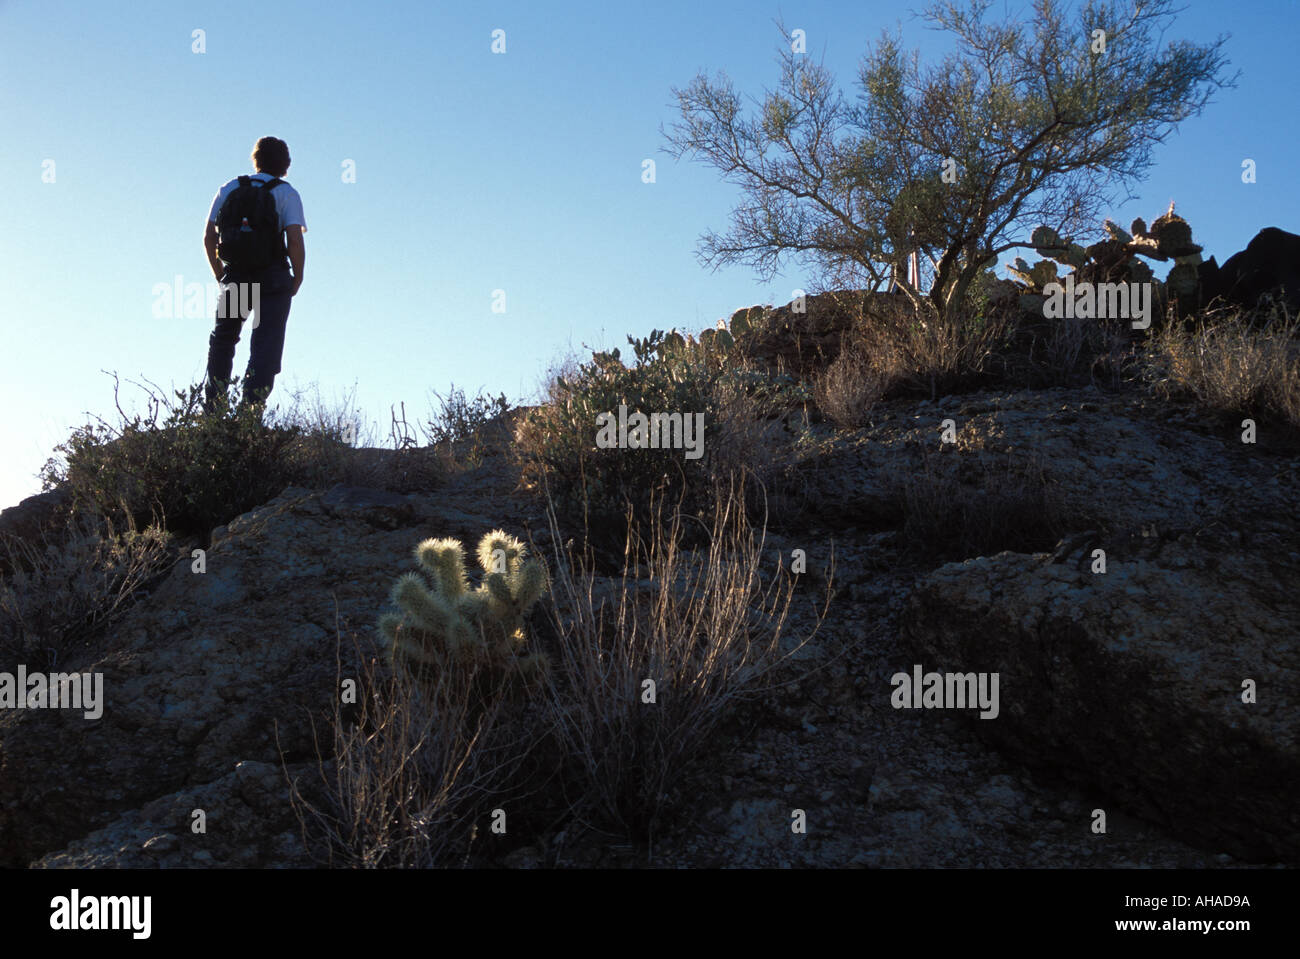 Lost hiker in the desert Stock Photo